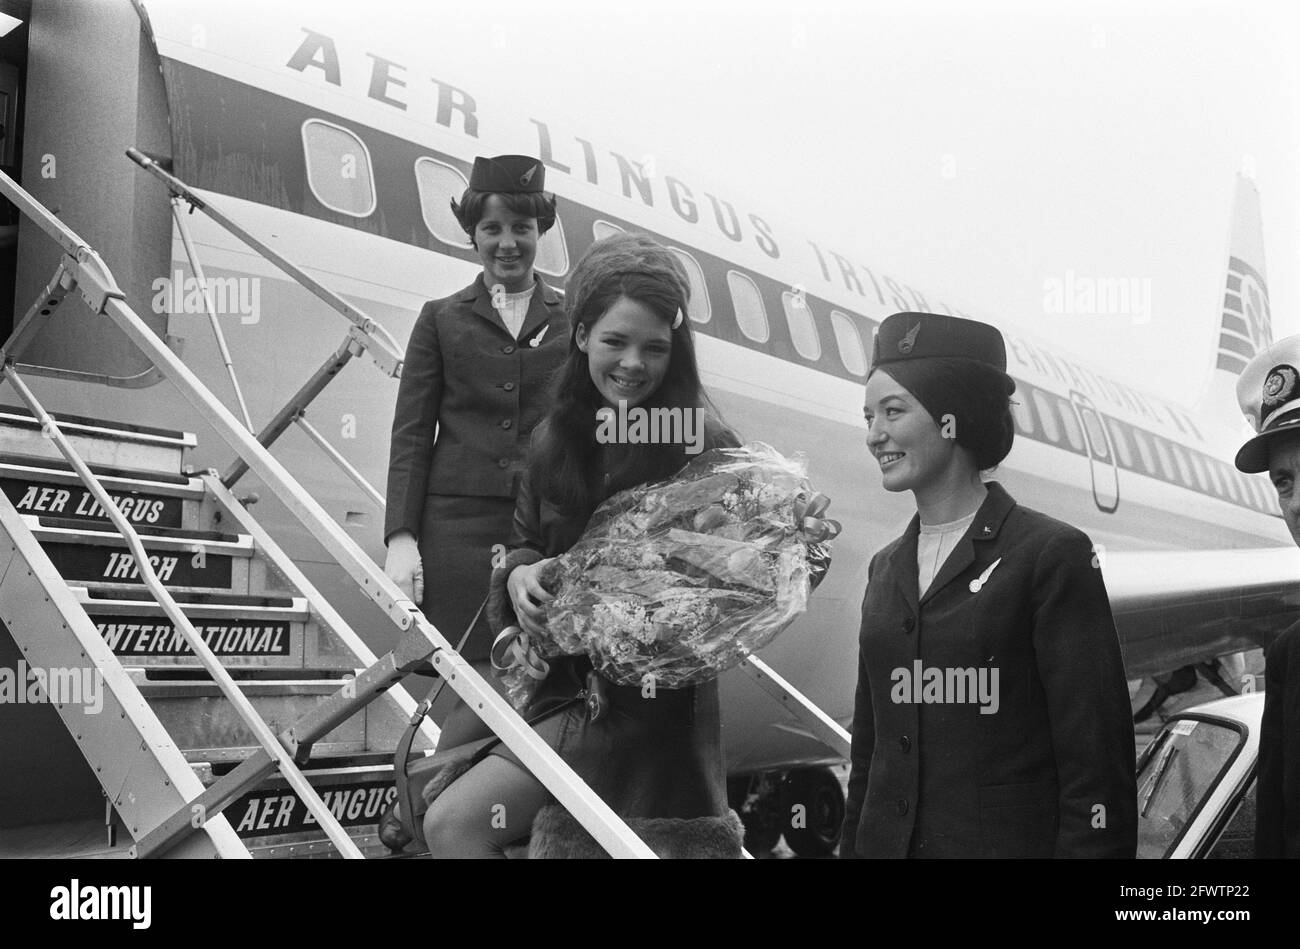 Dana, winner Song Contest leaves for Schiphol Airport, March 23, 1970, SONGFESTIVALS, winners, The Netherlands, 20th century press agency photo, news to remember, documentary, historic photography 1945-1990, visual stories, human history of the Twentieth Century, capturing moments in time Stock Photo